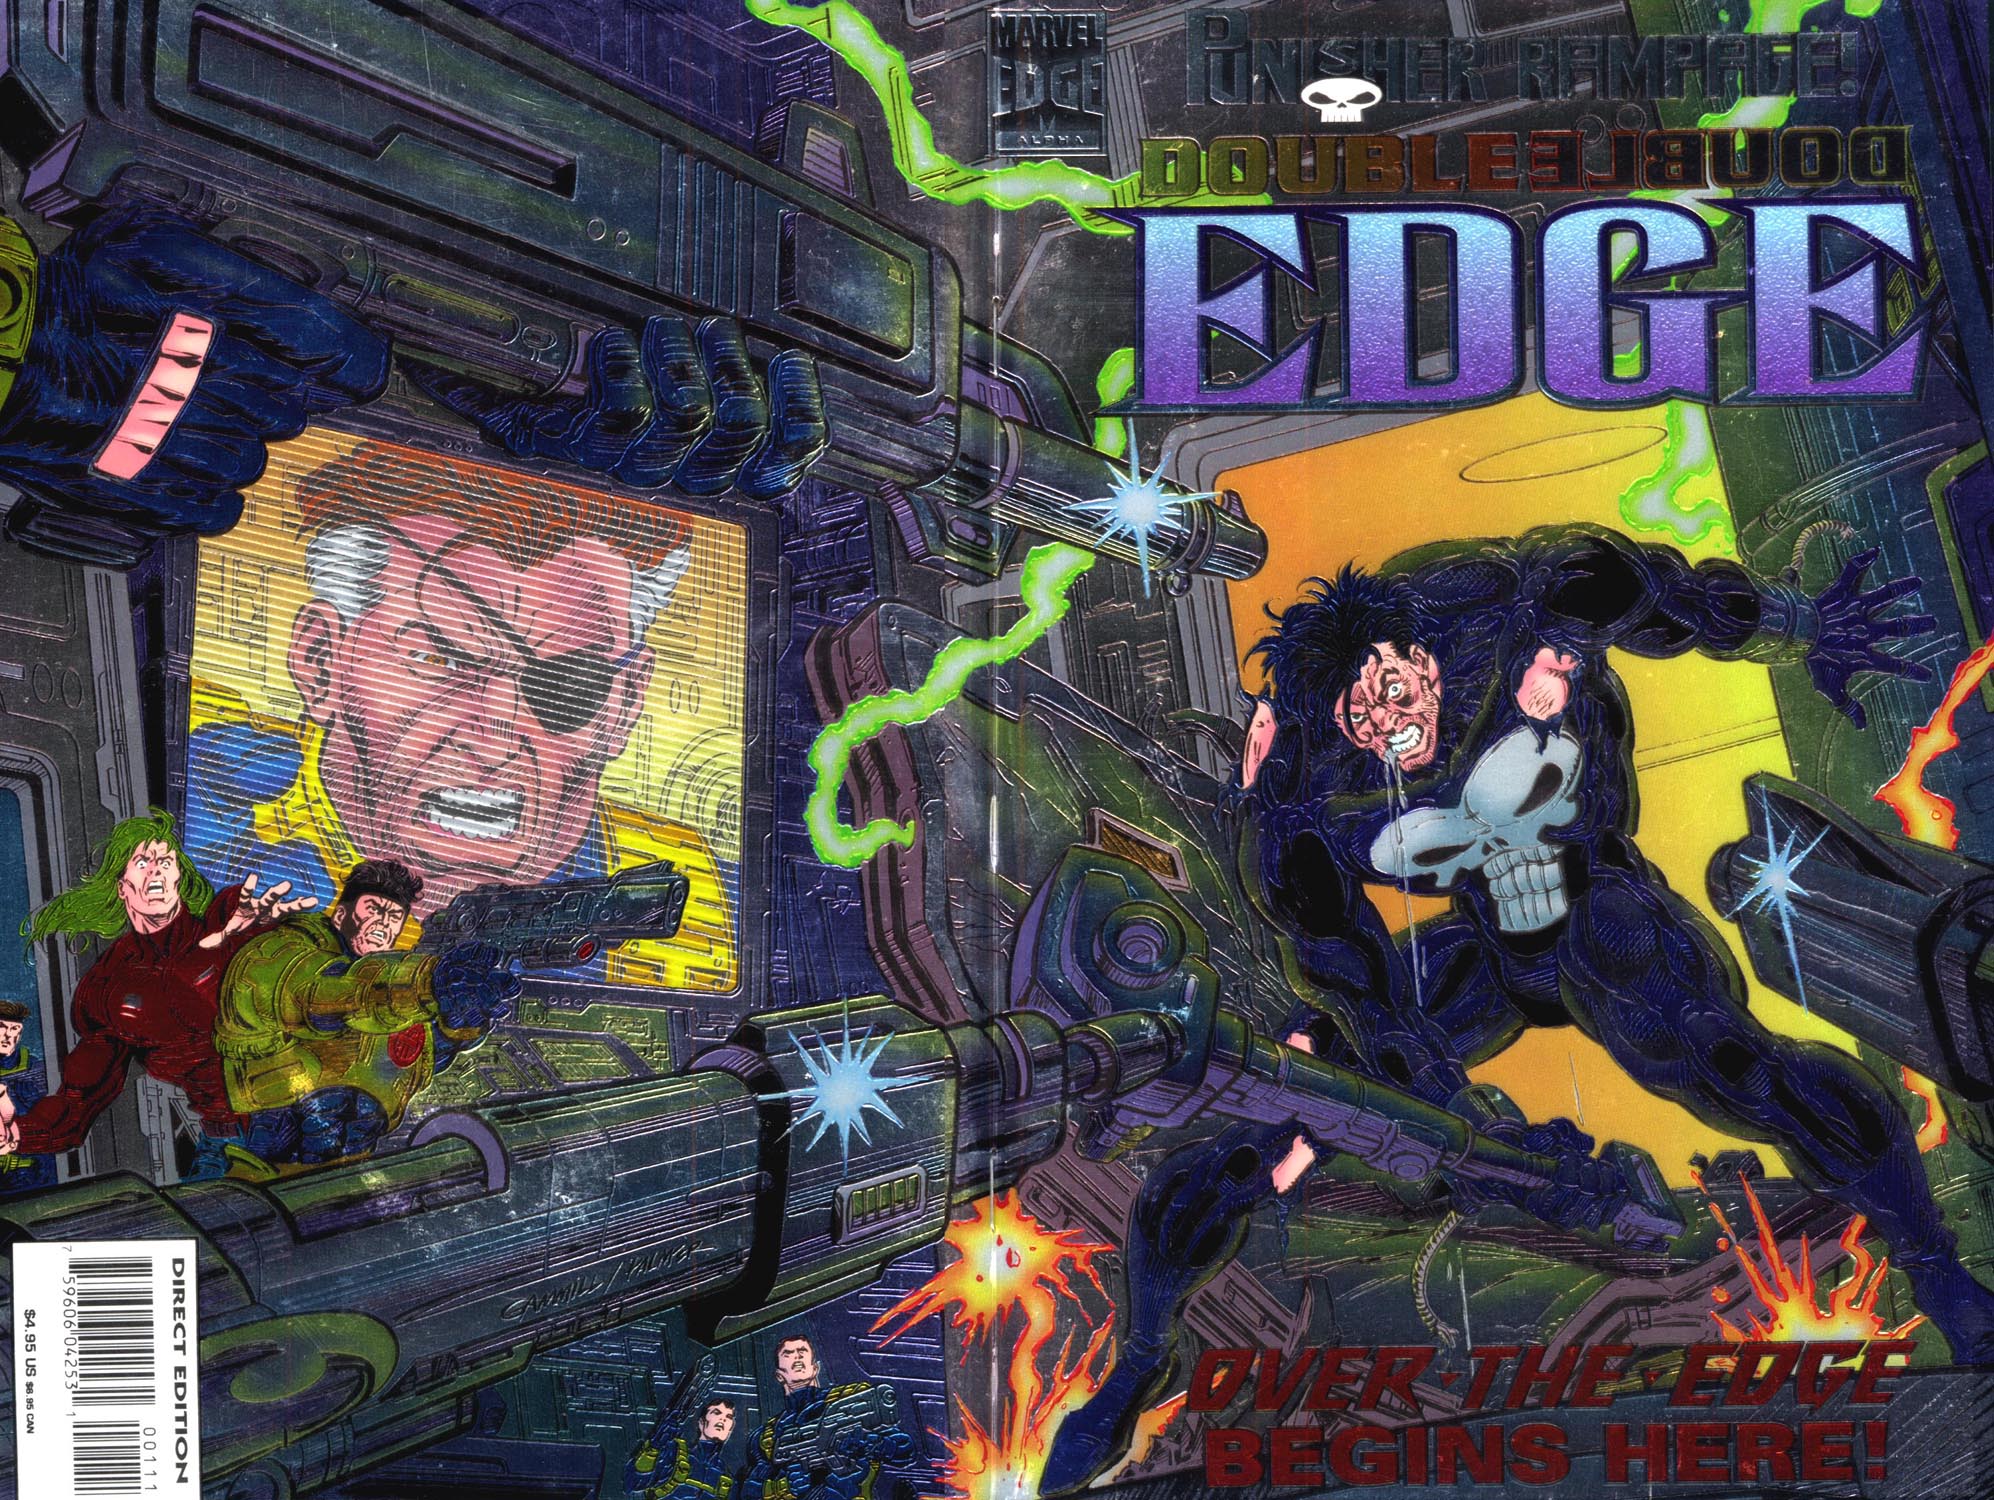 Read online Double Edge comic -  Issue # Issue Alpha - 1